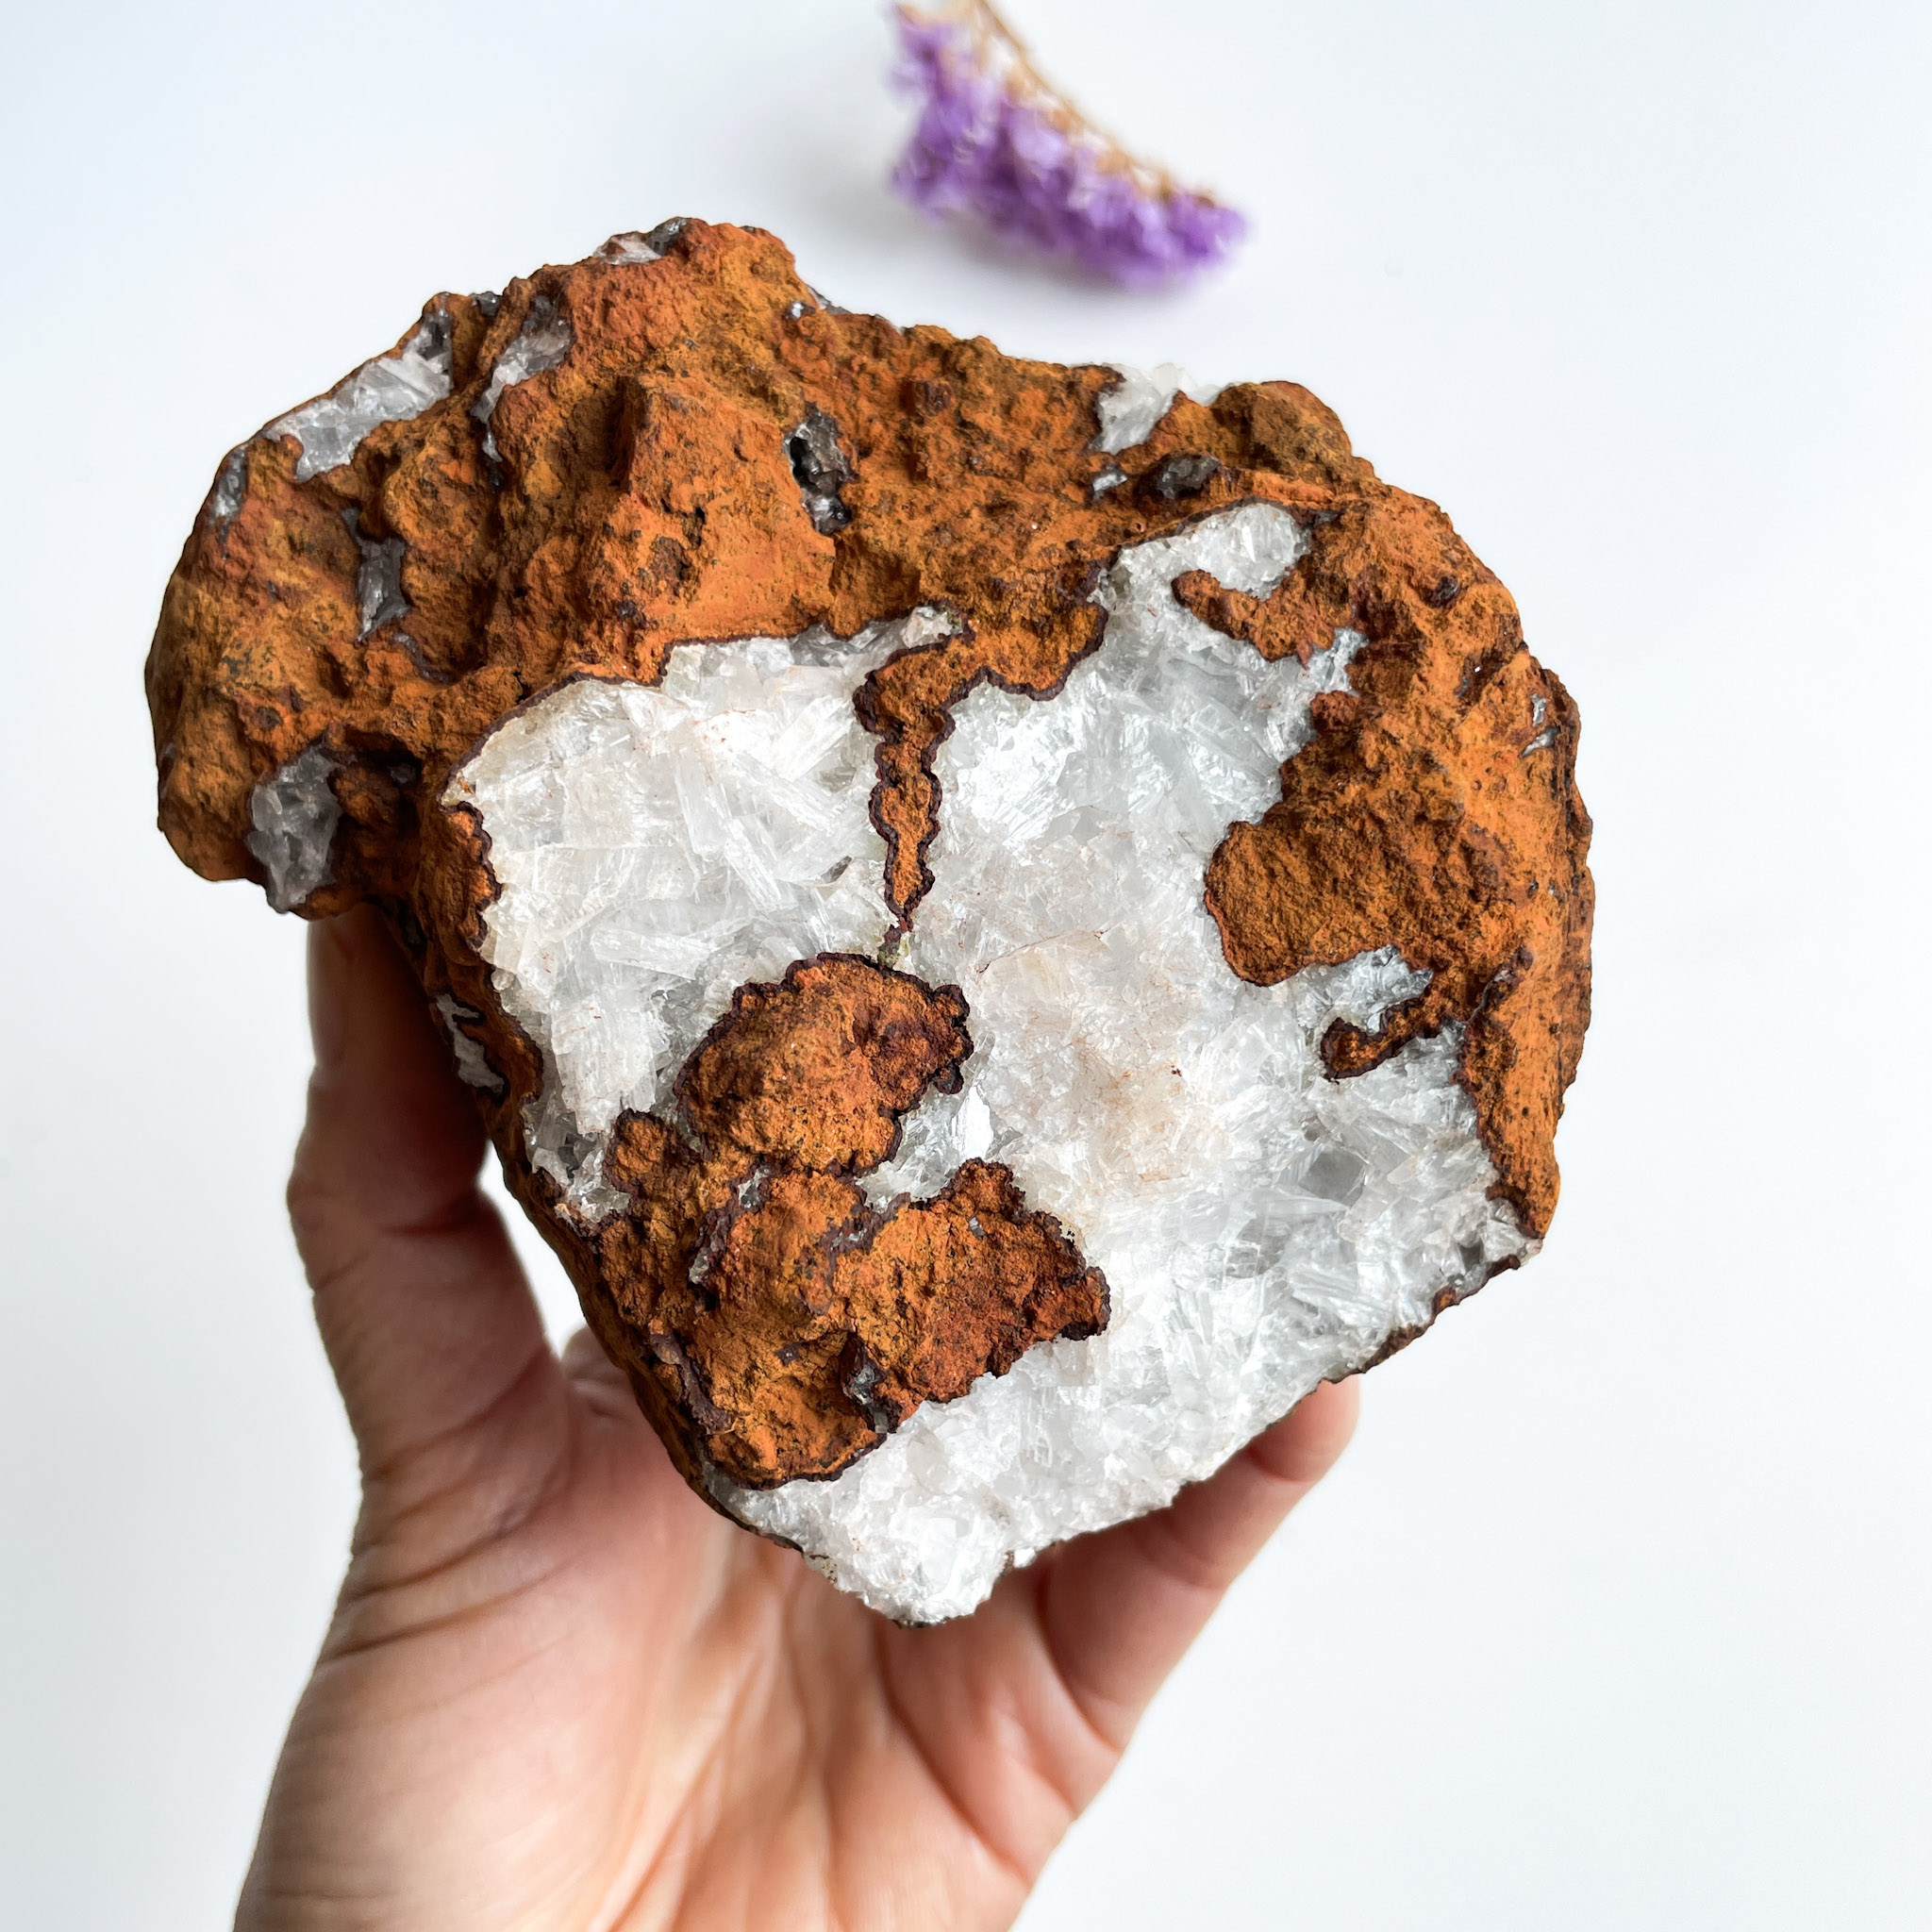 A hand holding a large geode with clear quartz crystals inside and rough reddish-brown exterior, with a blurred purple flower in the background.